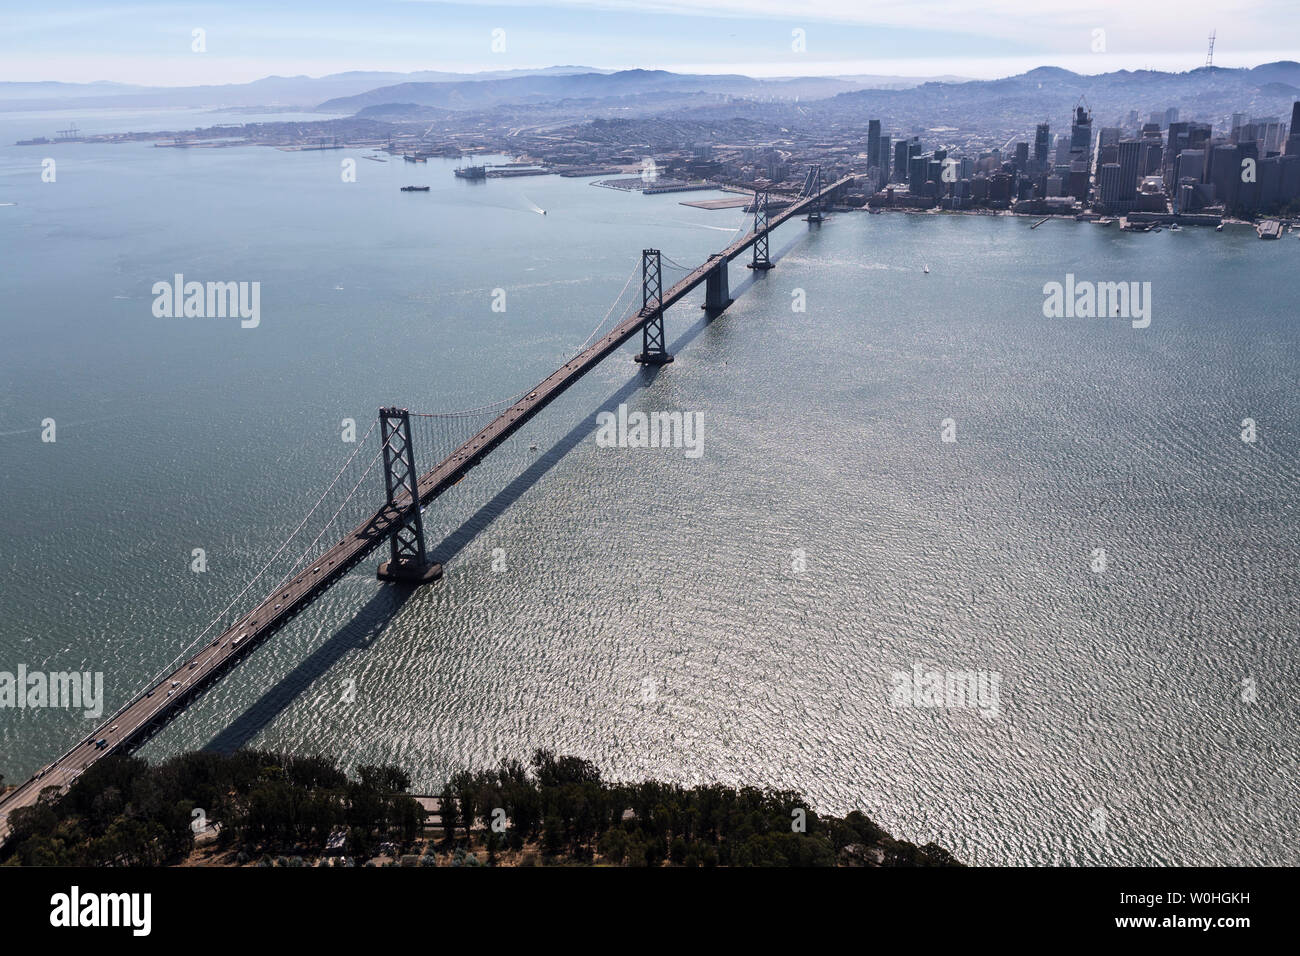 Aerial view of the Golden Gate Bridge and San Francisco bay on the scenic California coast. Stock Photo